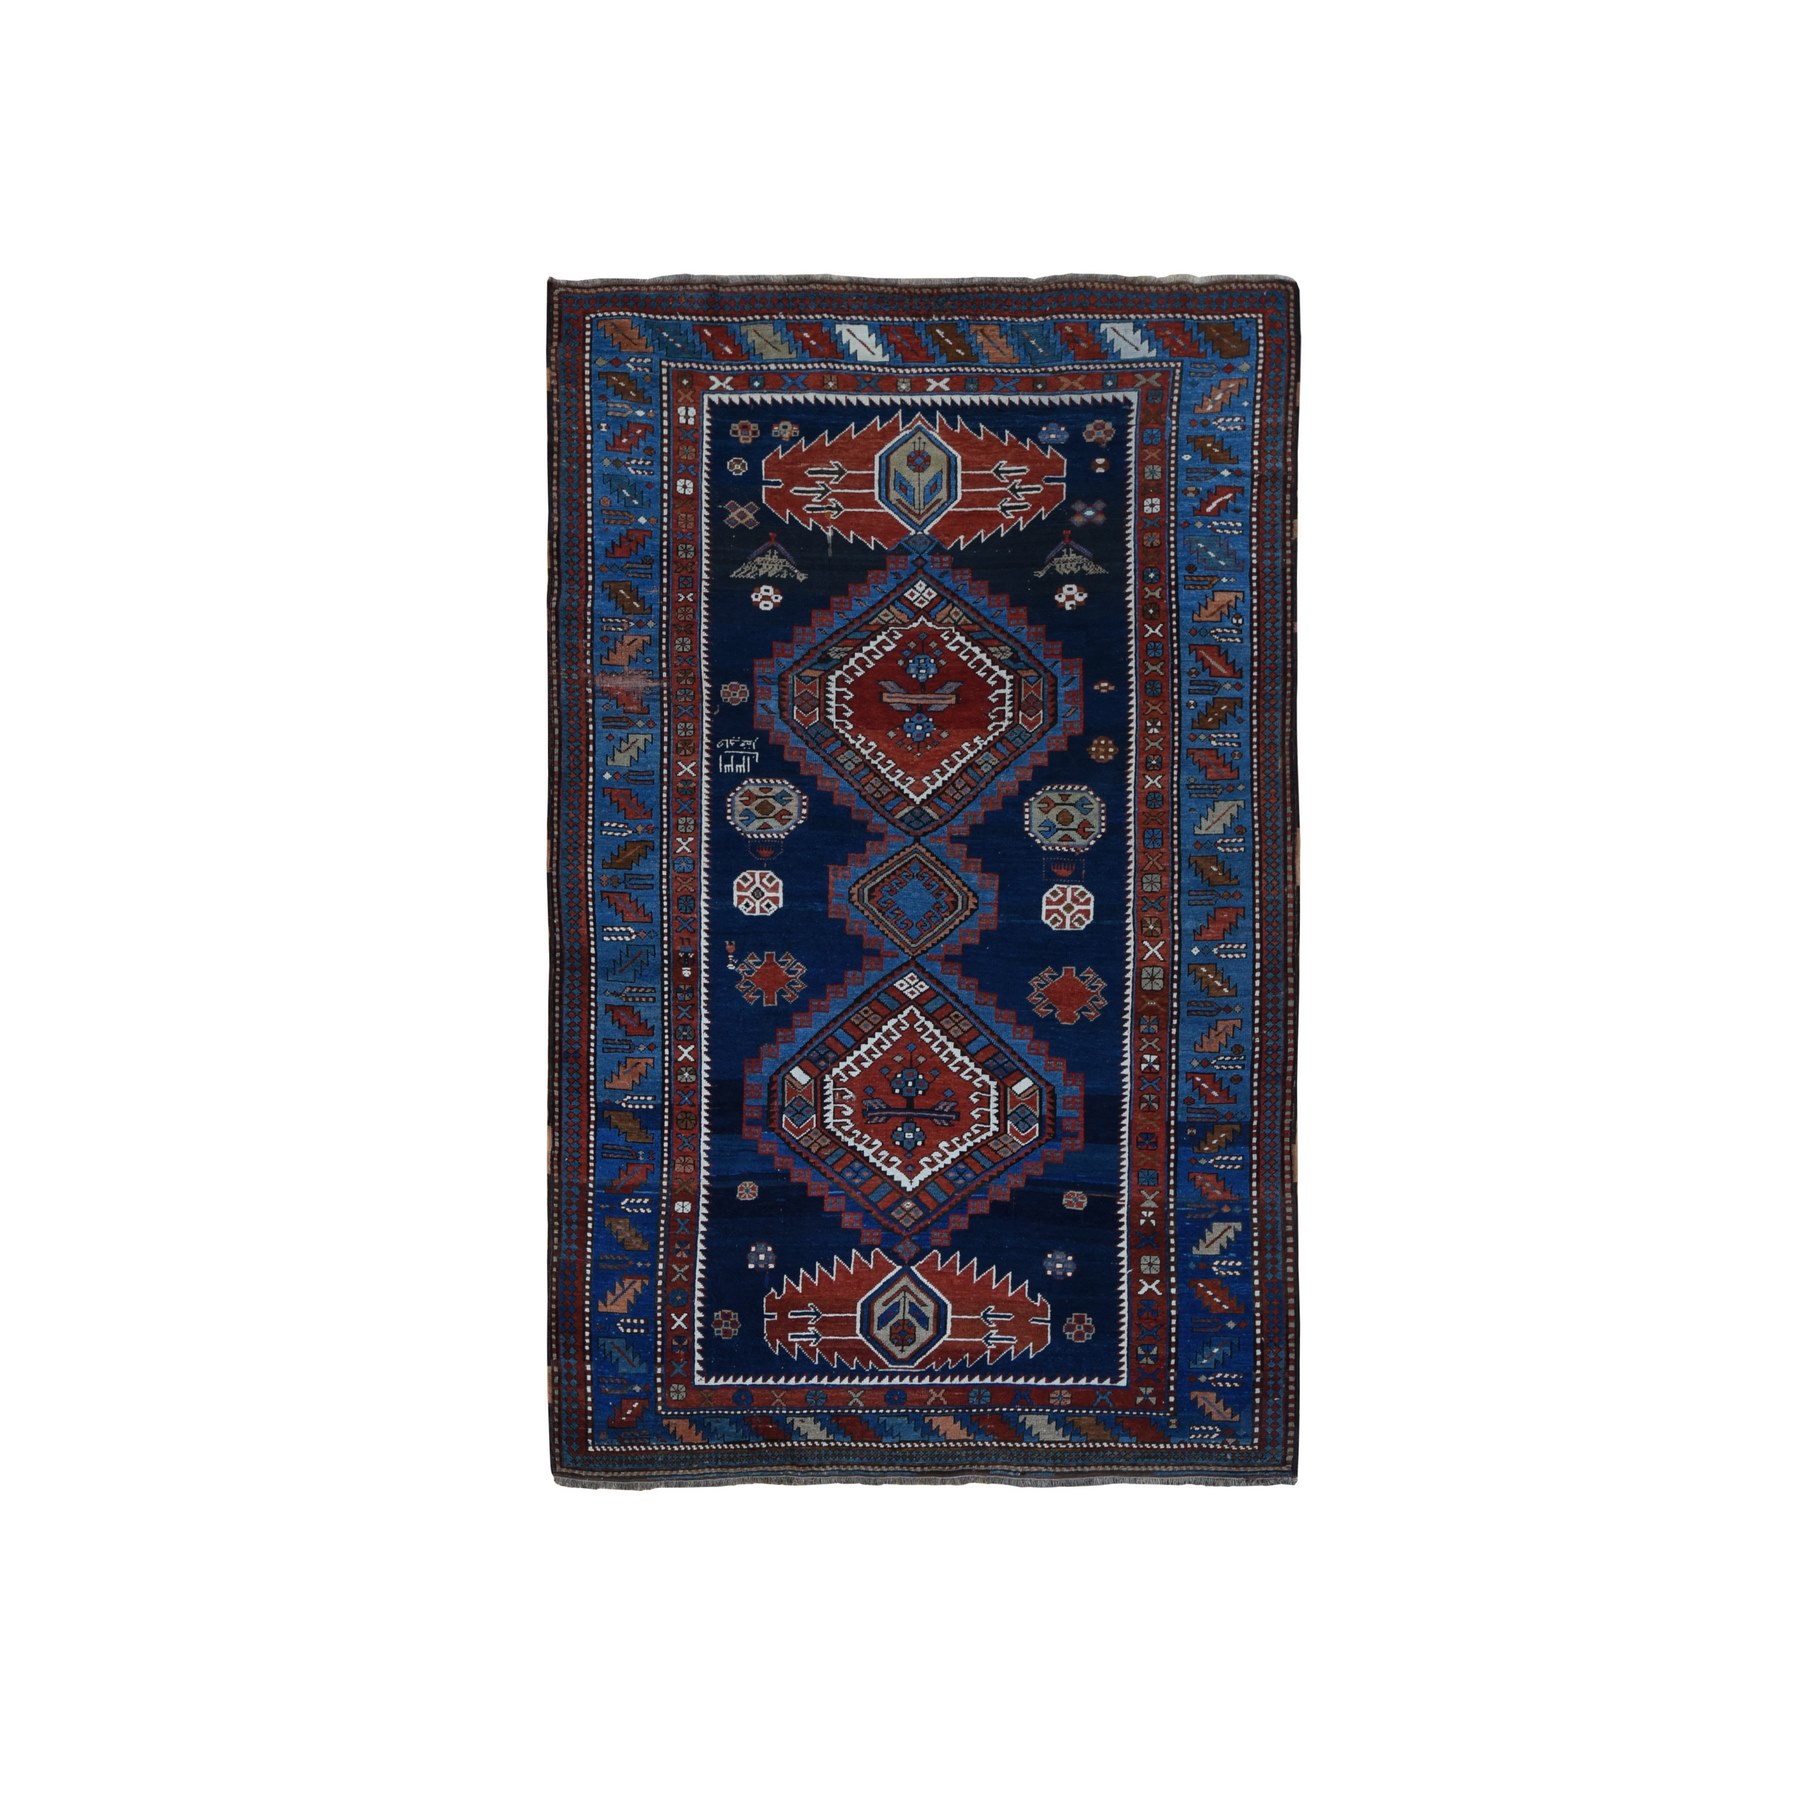  Wool Hand-Knotted Area Rug 6'2